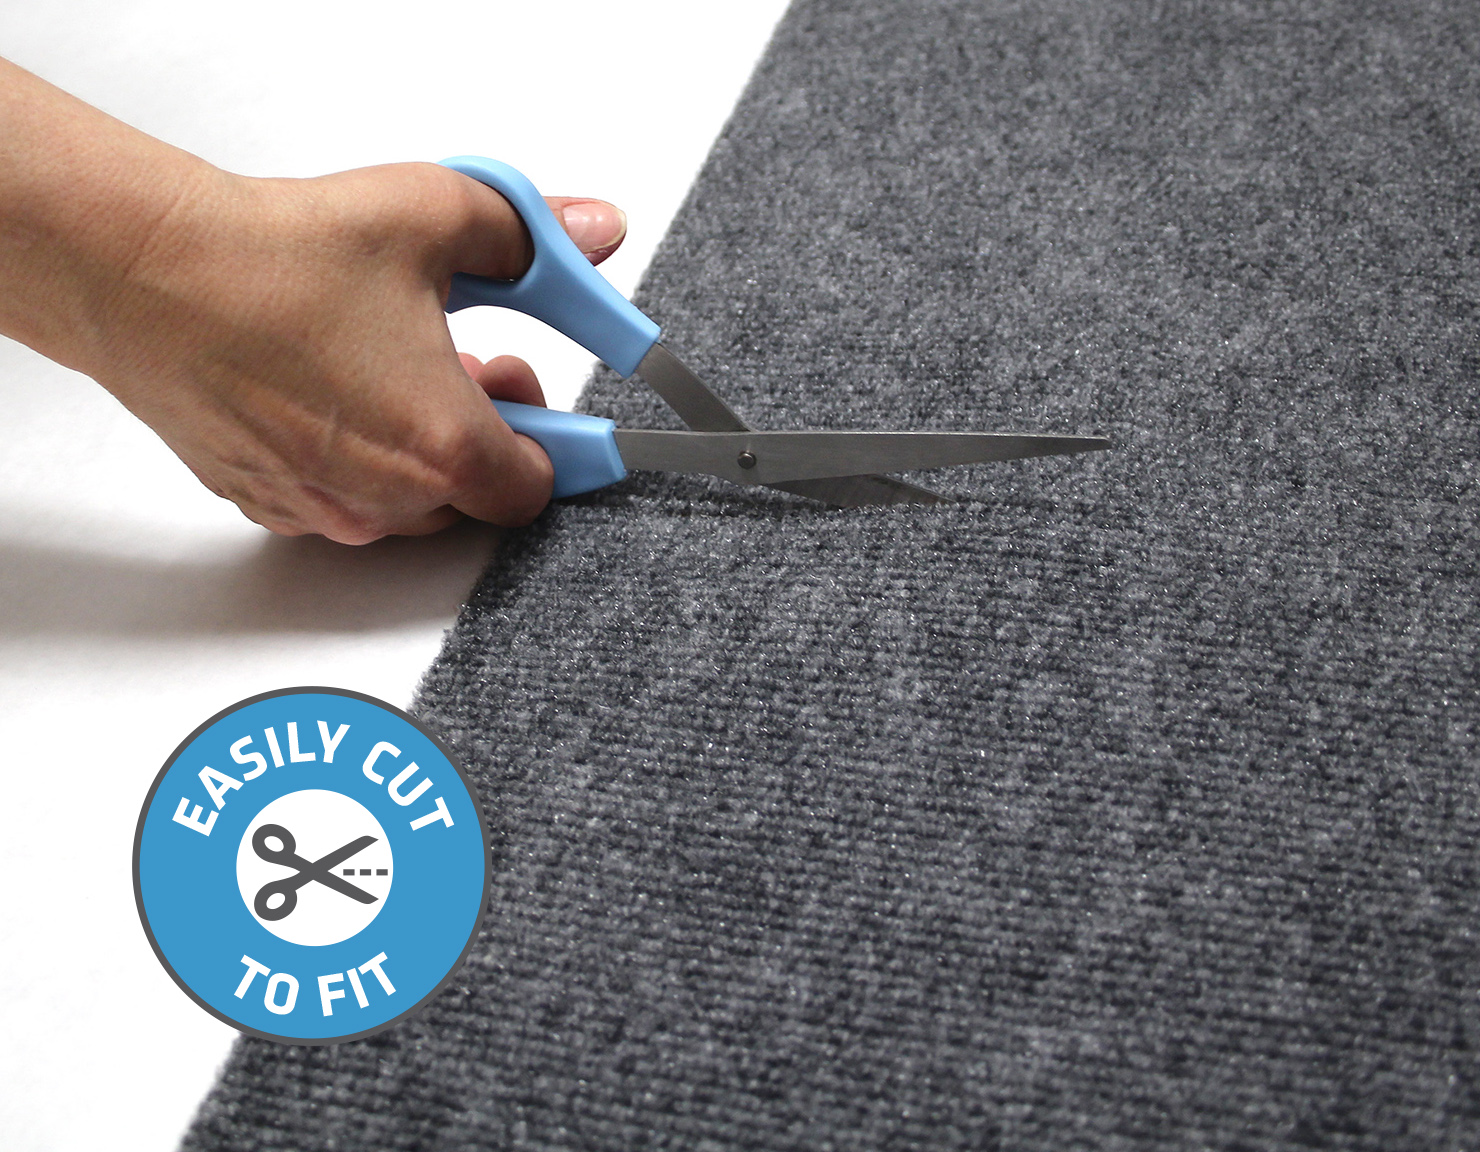 Extra Large Litter Mat - RPM Drymate - Surface Protection Products for Your  Home